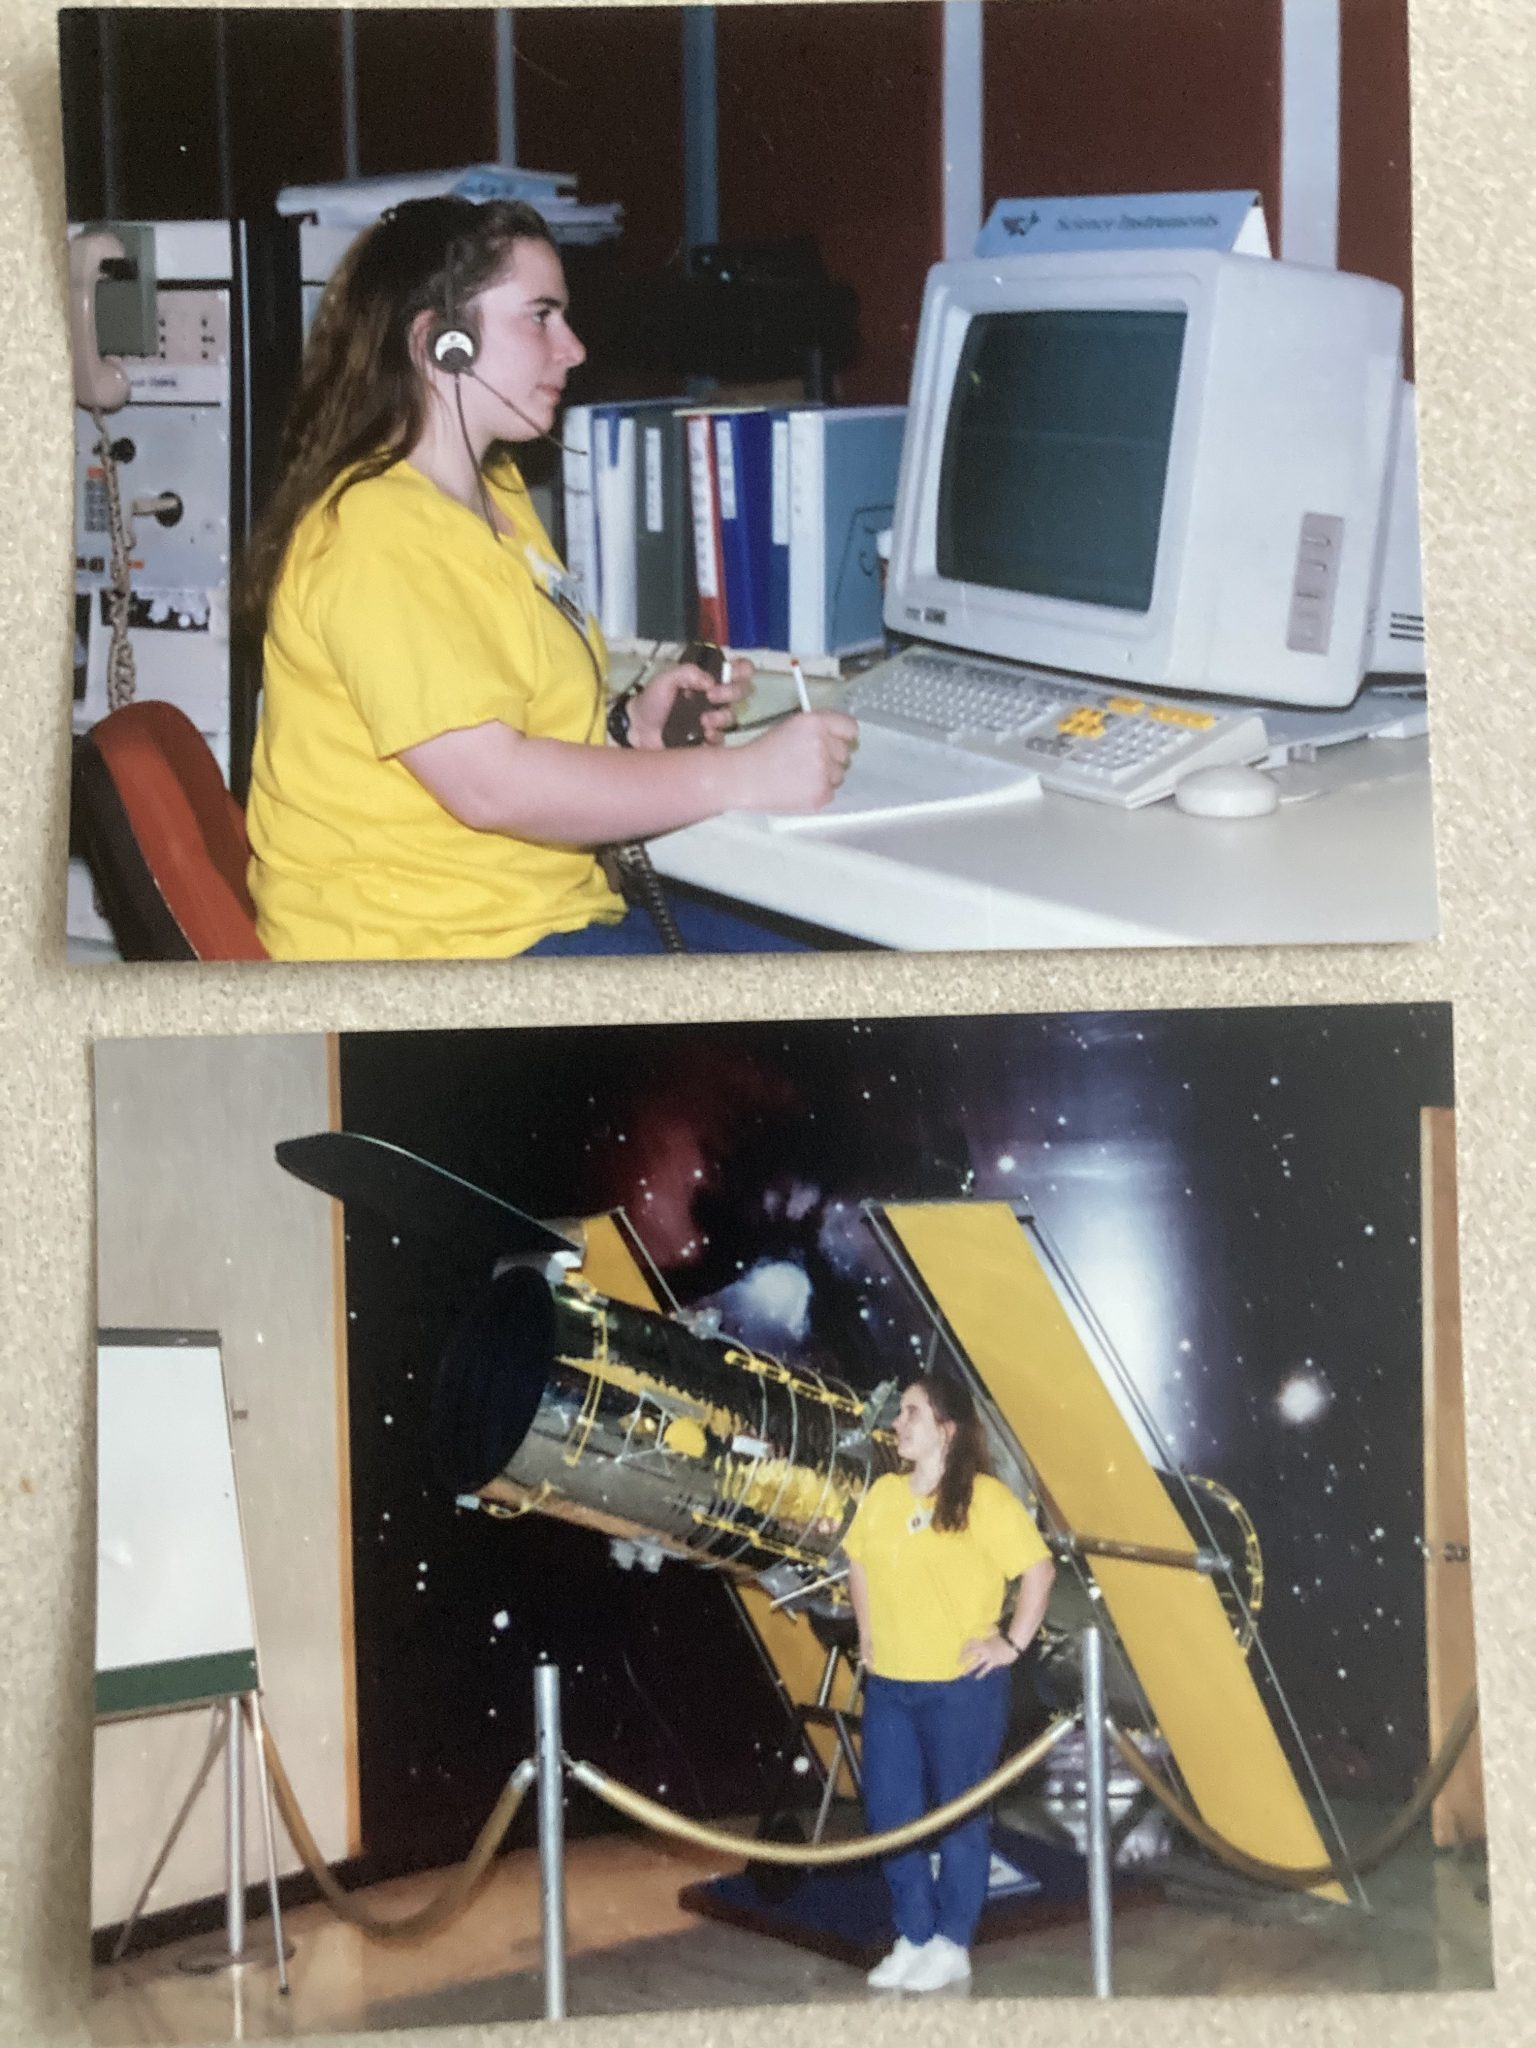 Two vintage photos showing Lynn Bassford, a woman with long brown hair, in the 1990's. She wears a yellow T-shirt, jeans, and white tennis shoes in both photos. In the top photo, she sits at a desk wearing a headset and working on an old desktop computer, with books, manuals and other equipment visible behind her. In the lower photo, she poses in front of a full-scale model of the Hubble Space Telescope. Hubble looks like a silver cylinder with long, rectangular solar panels attached to each side.